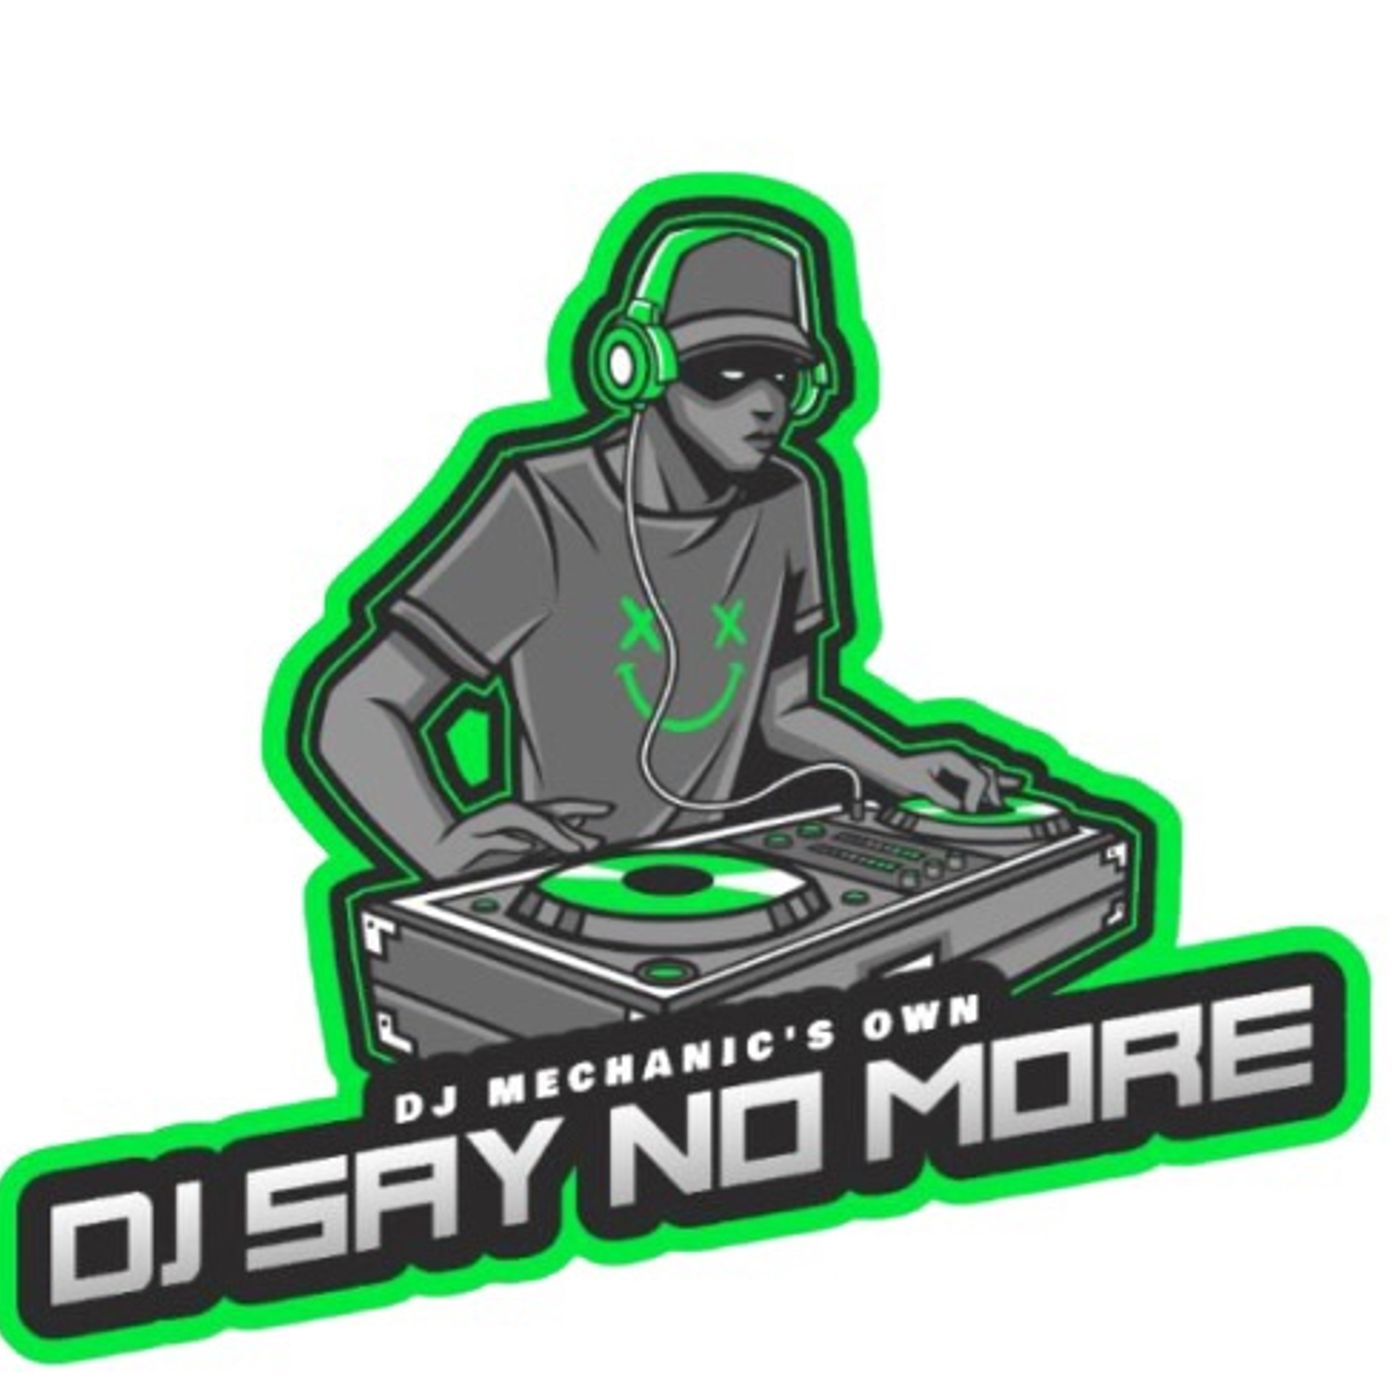 Sold out Sunday- DJ Say No More live mix